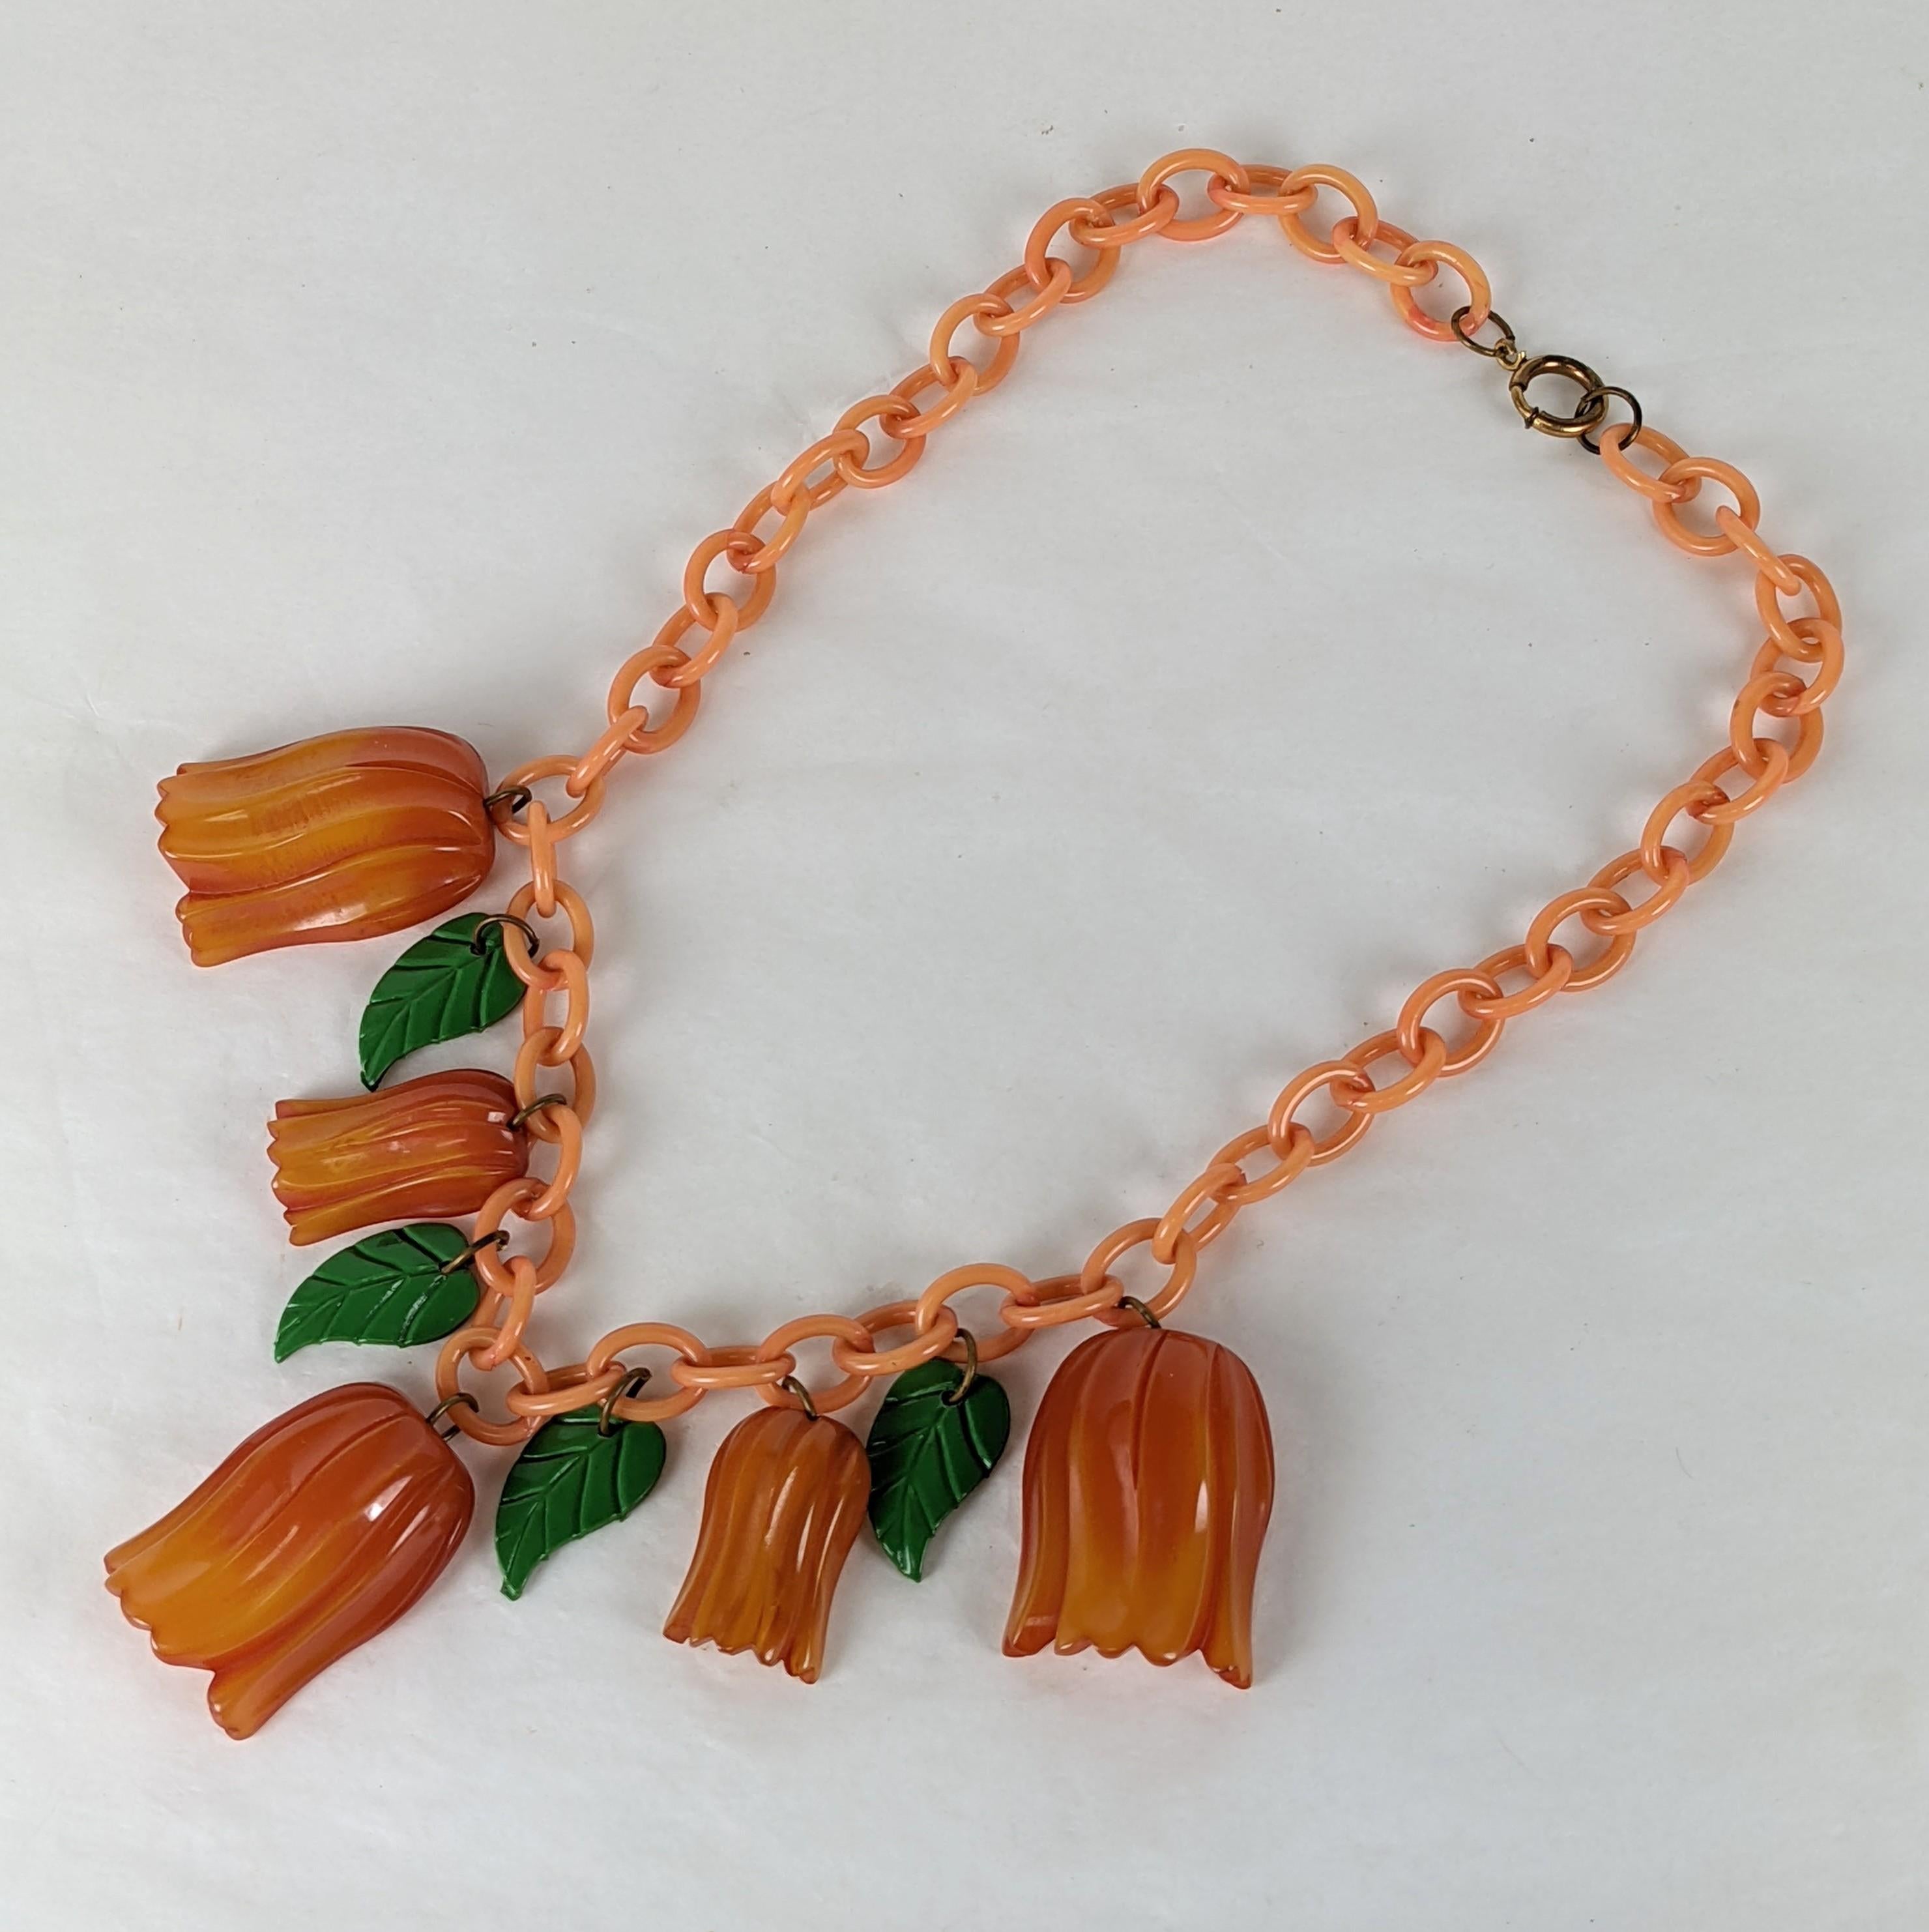 Wonderful and Rare Bakelite Tulip Necklace from the Art Deco period. Hand carved tulip heads of different sizes retain their original tonal patina and are suspended from the original celluloid chain with celluloid leaves. Unusual subject matter, a